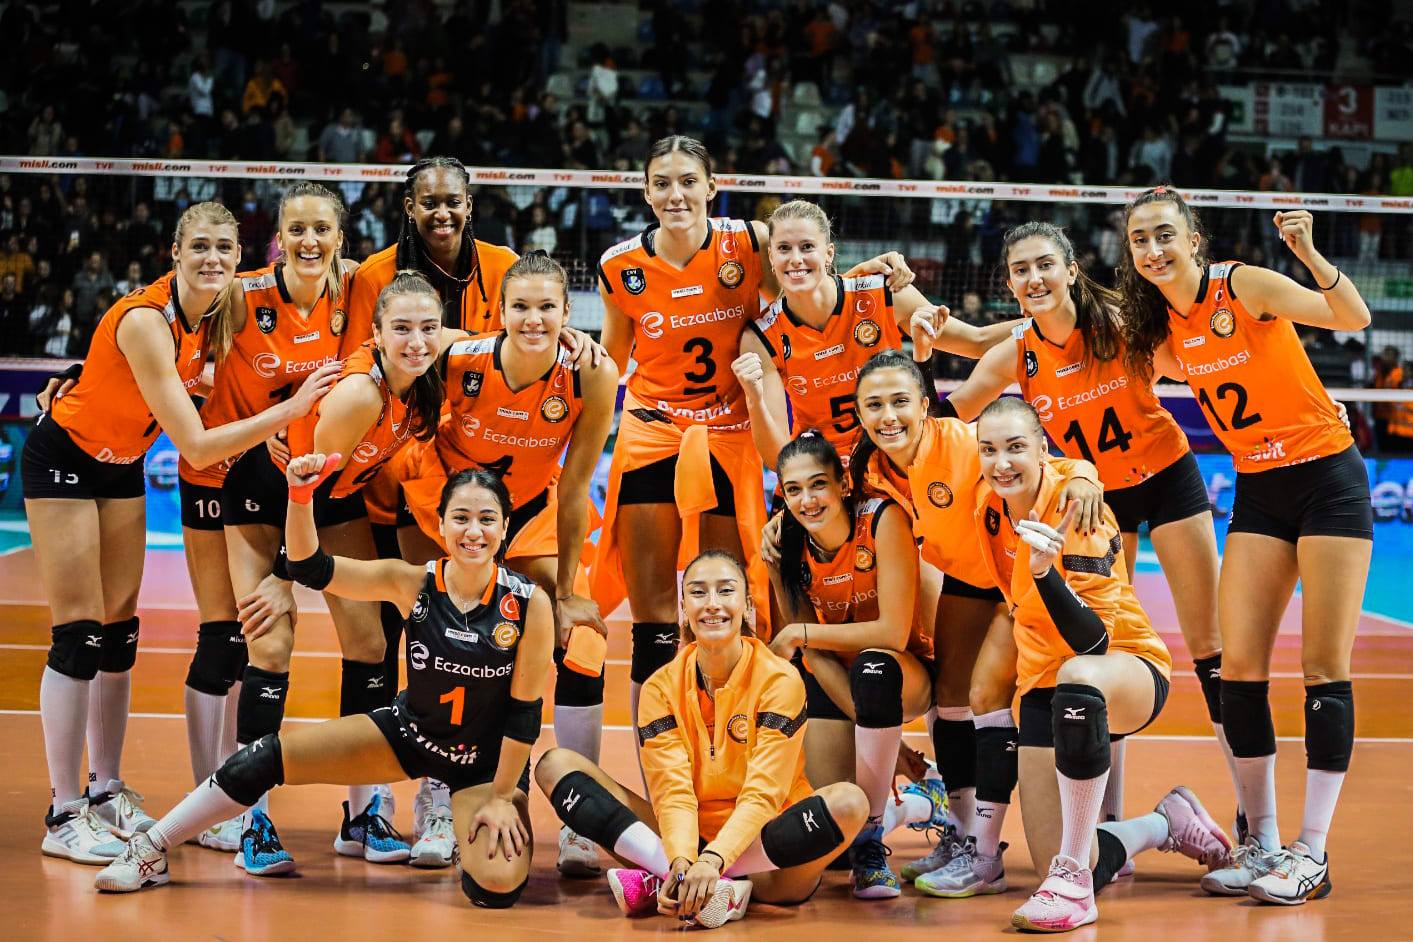 Volleyball Champions League event info and videos